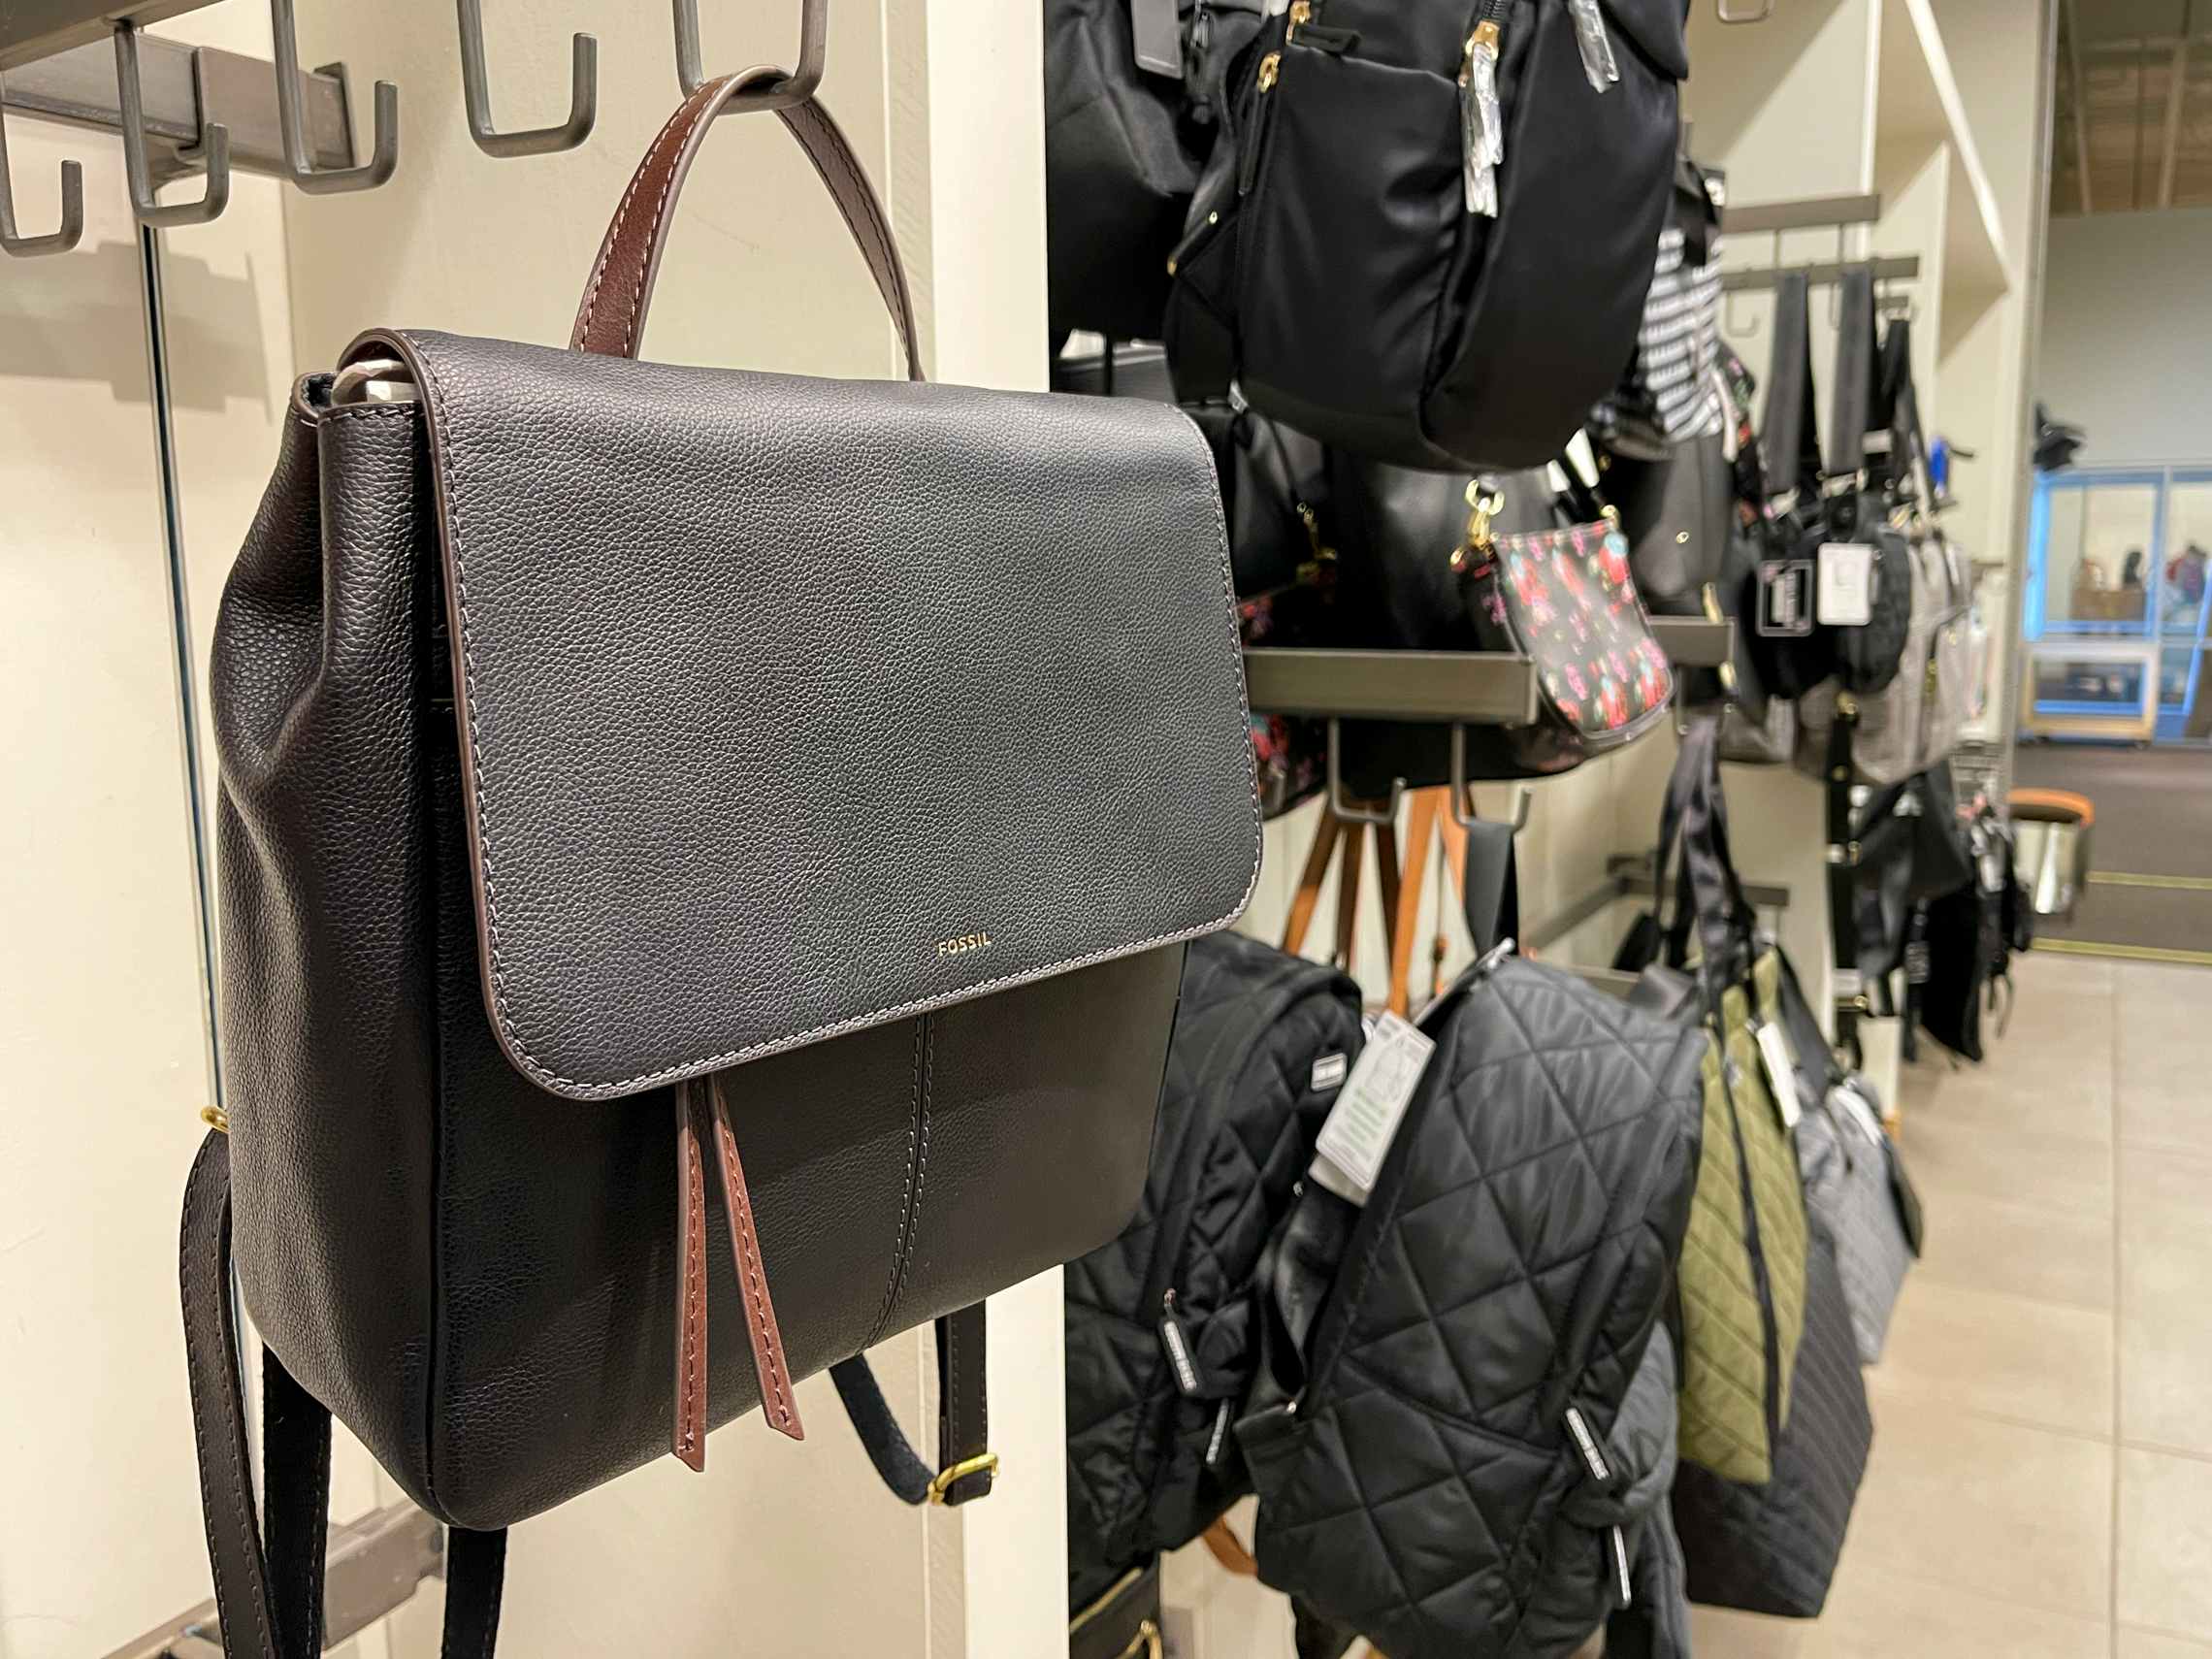 A fossil bag with other purses and backpacks hung on hooks inside a DSW store.